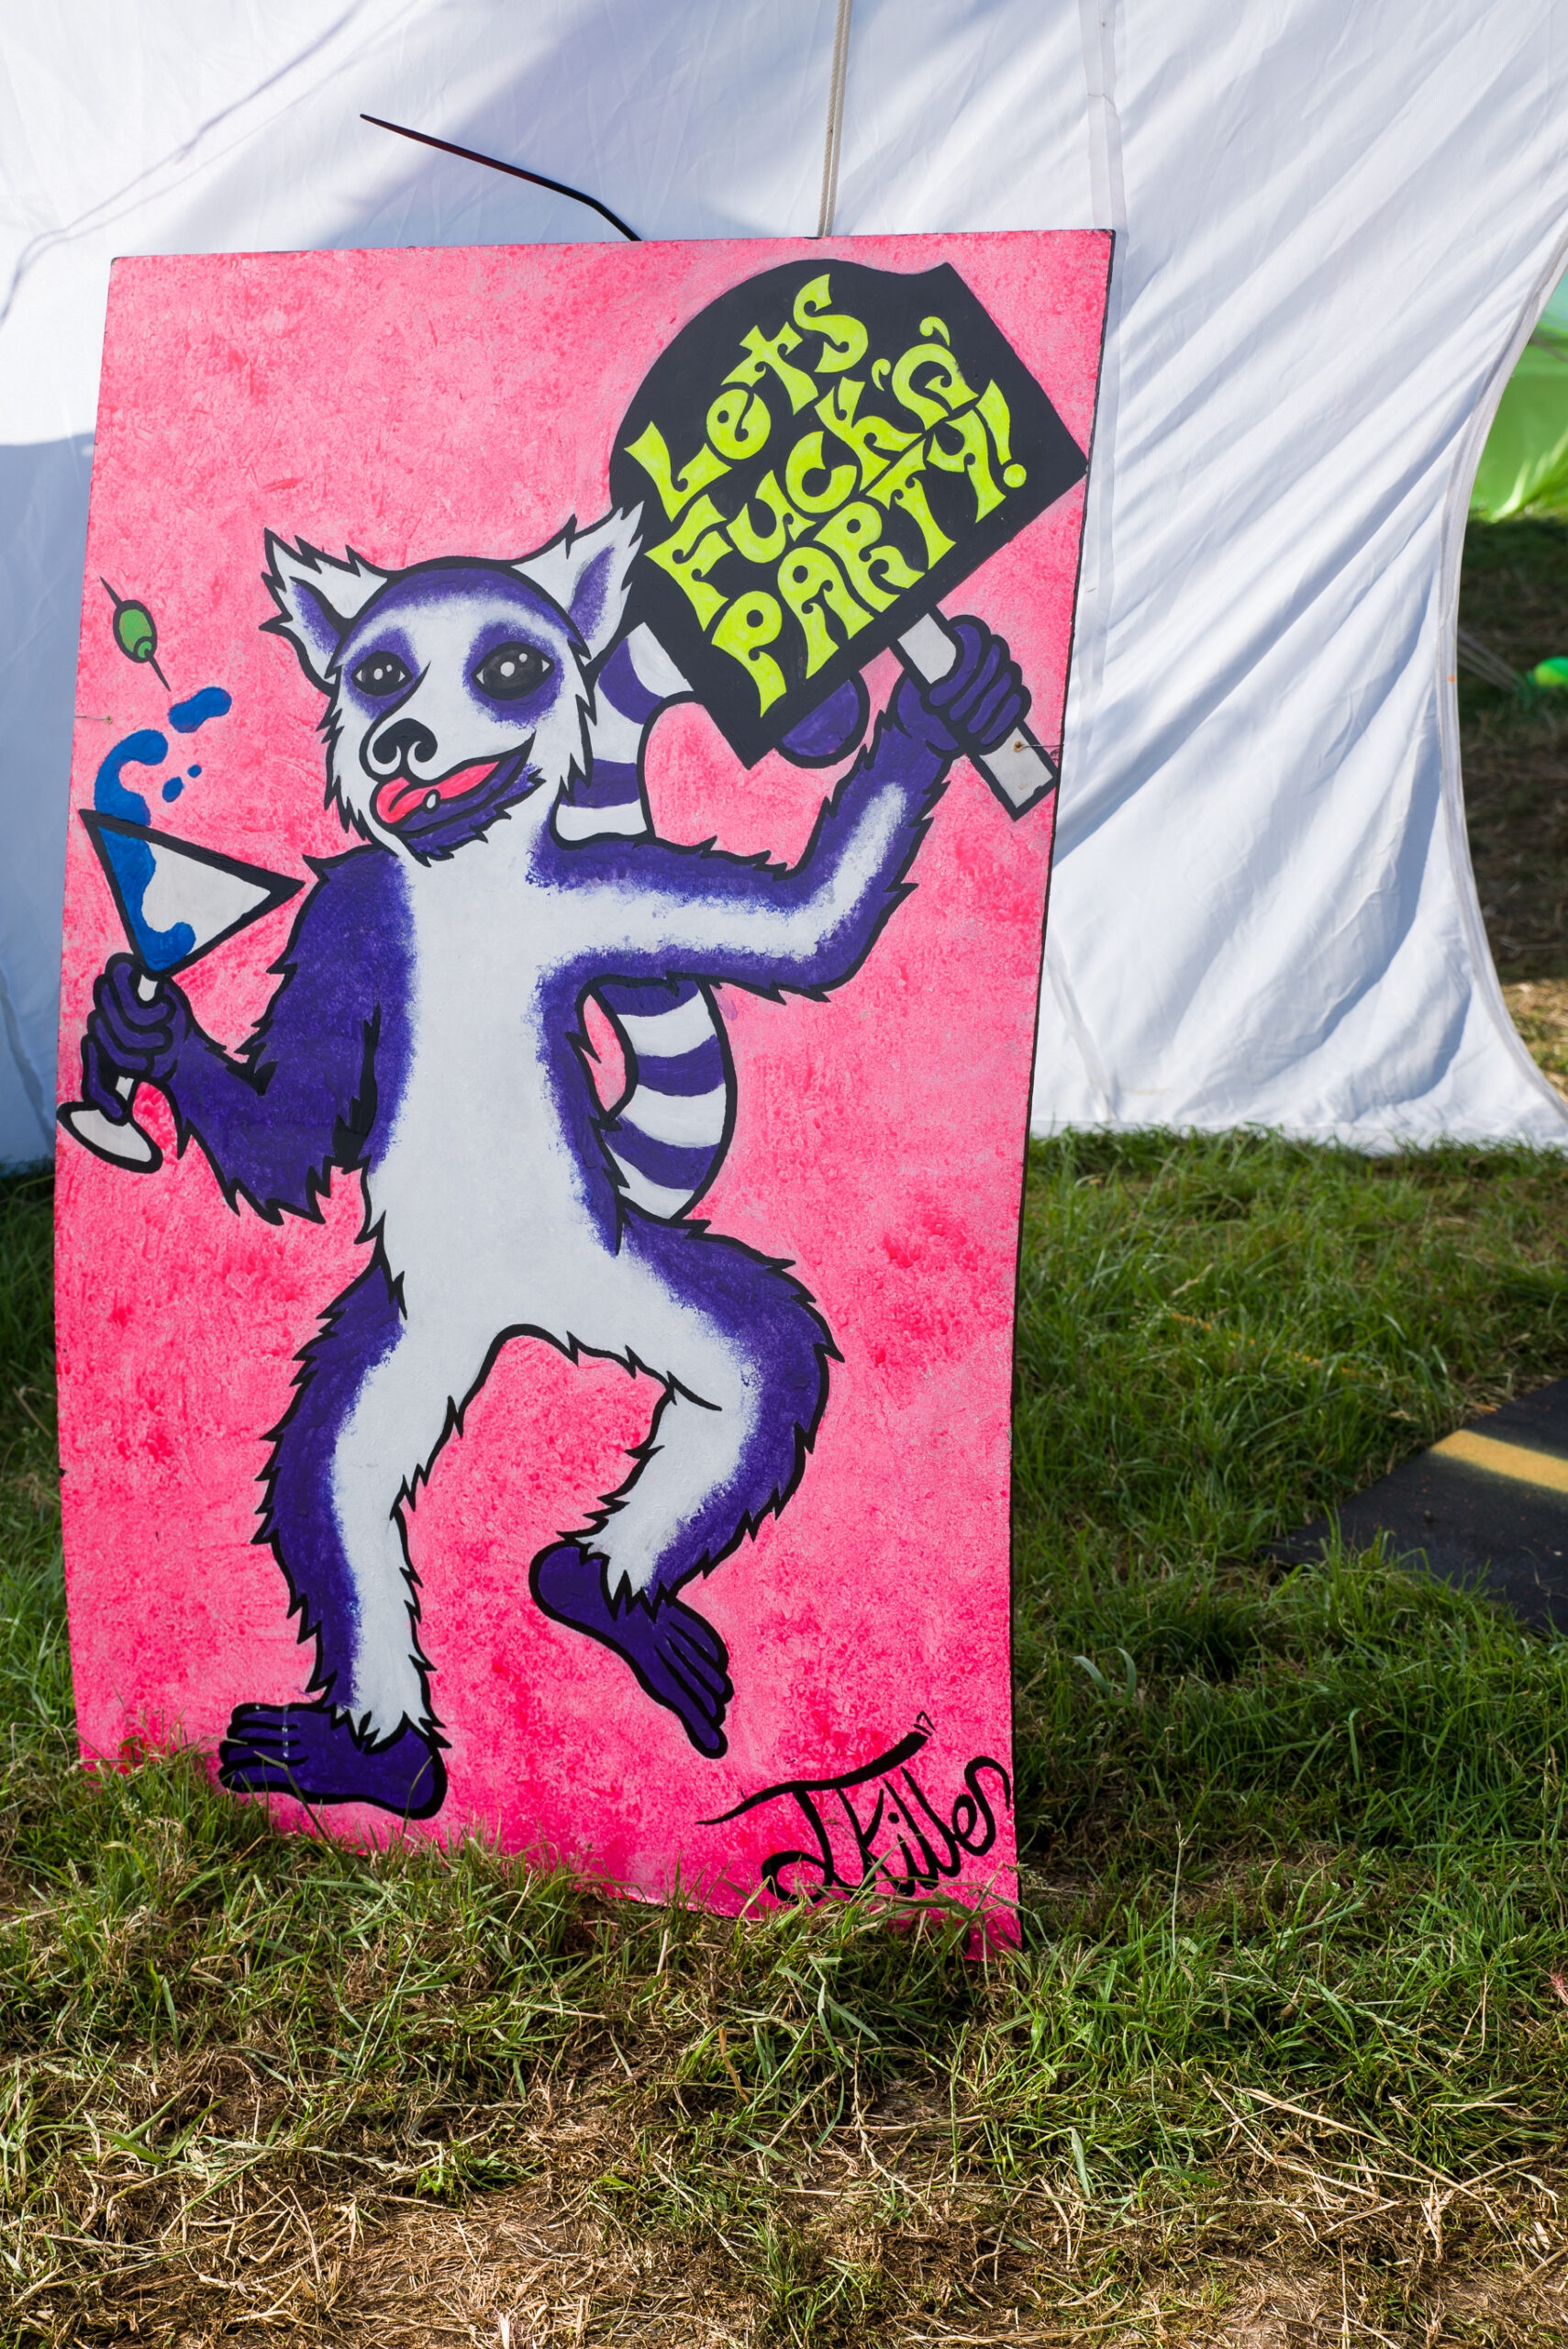 A poster of a leemur holding a cocktail glass and a sign that says let's fuckin party